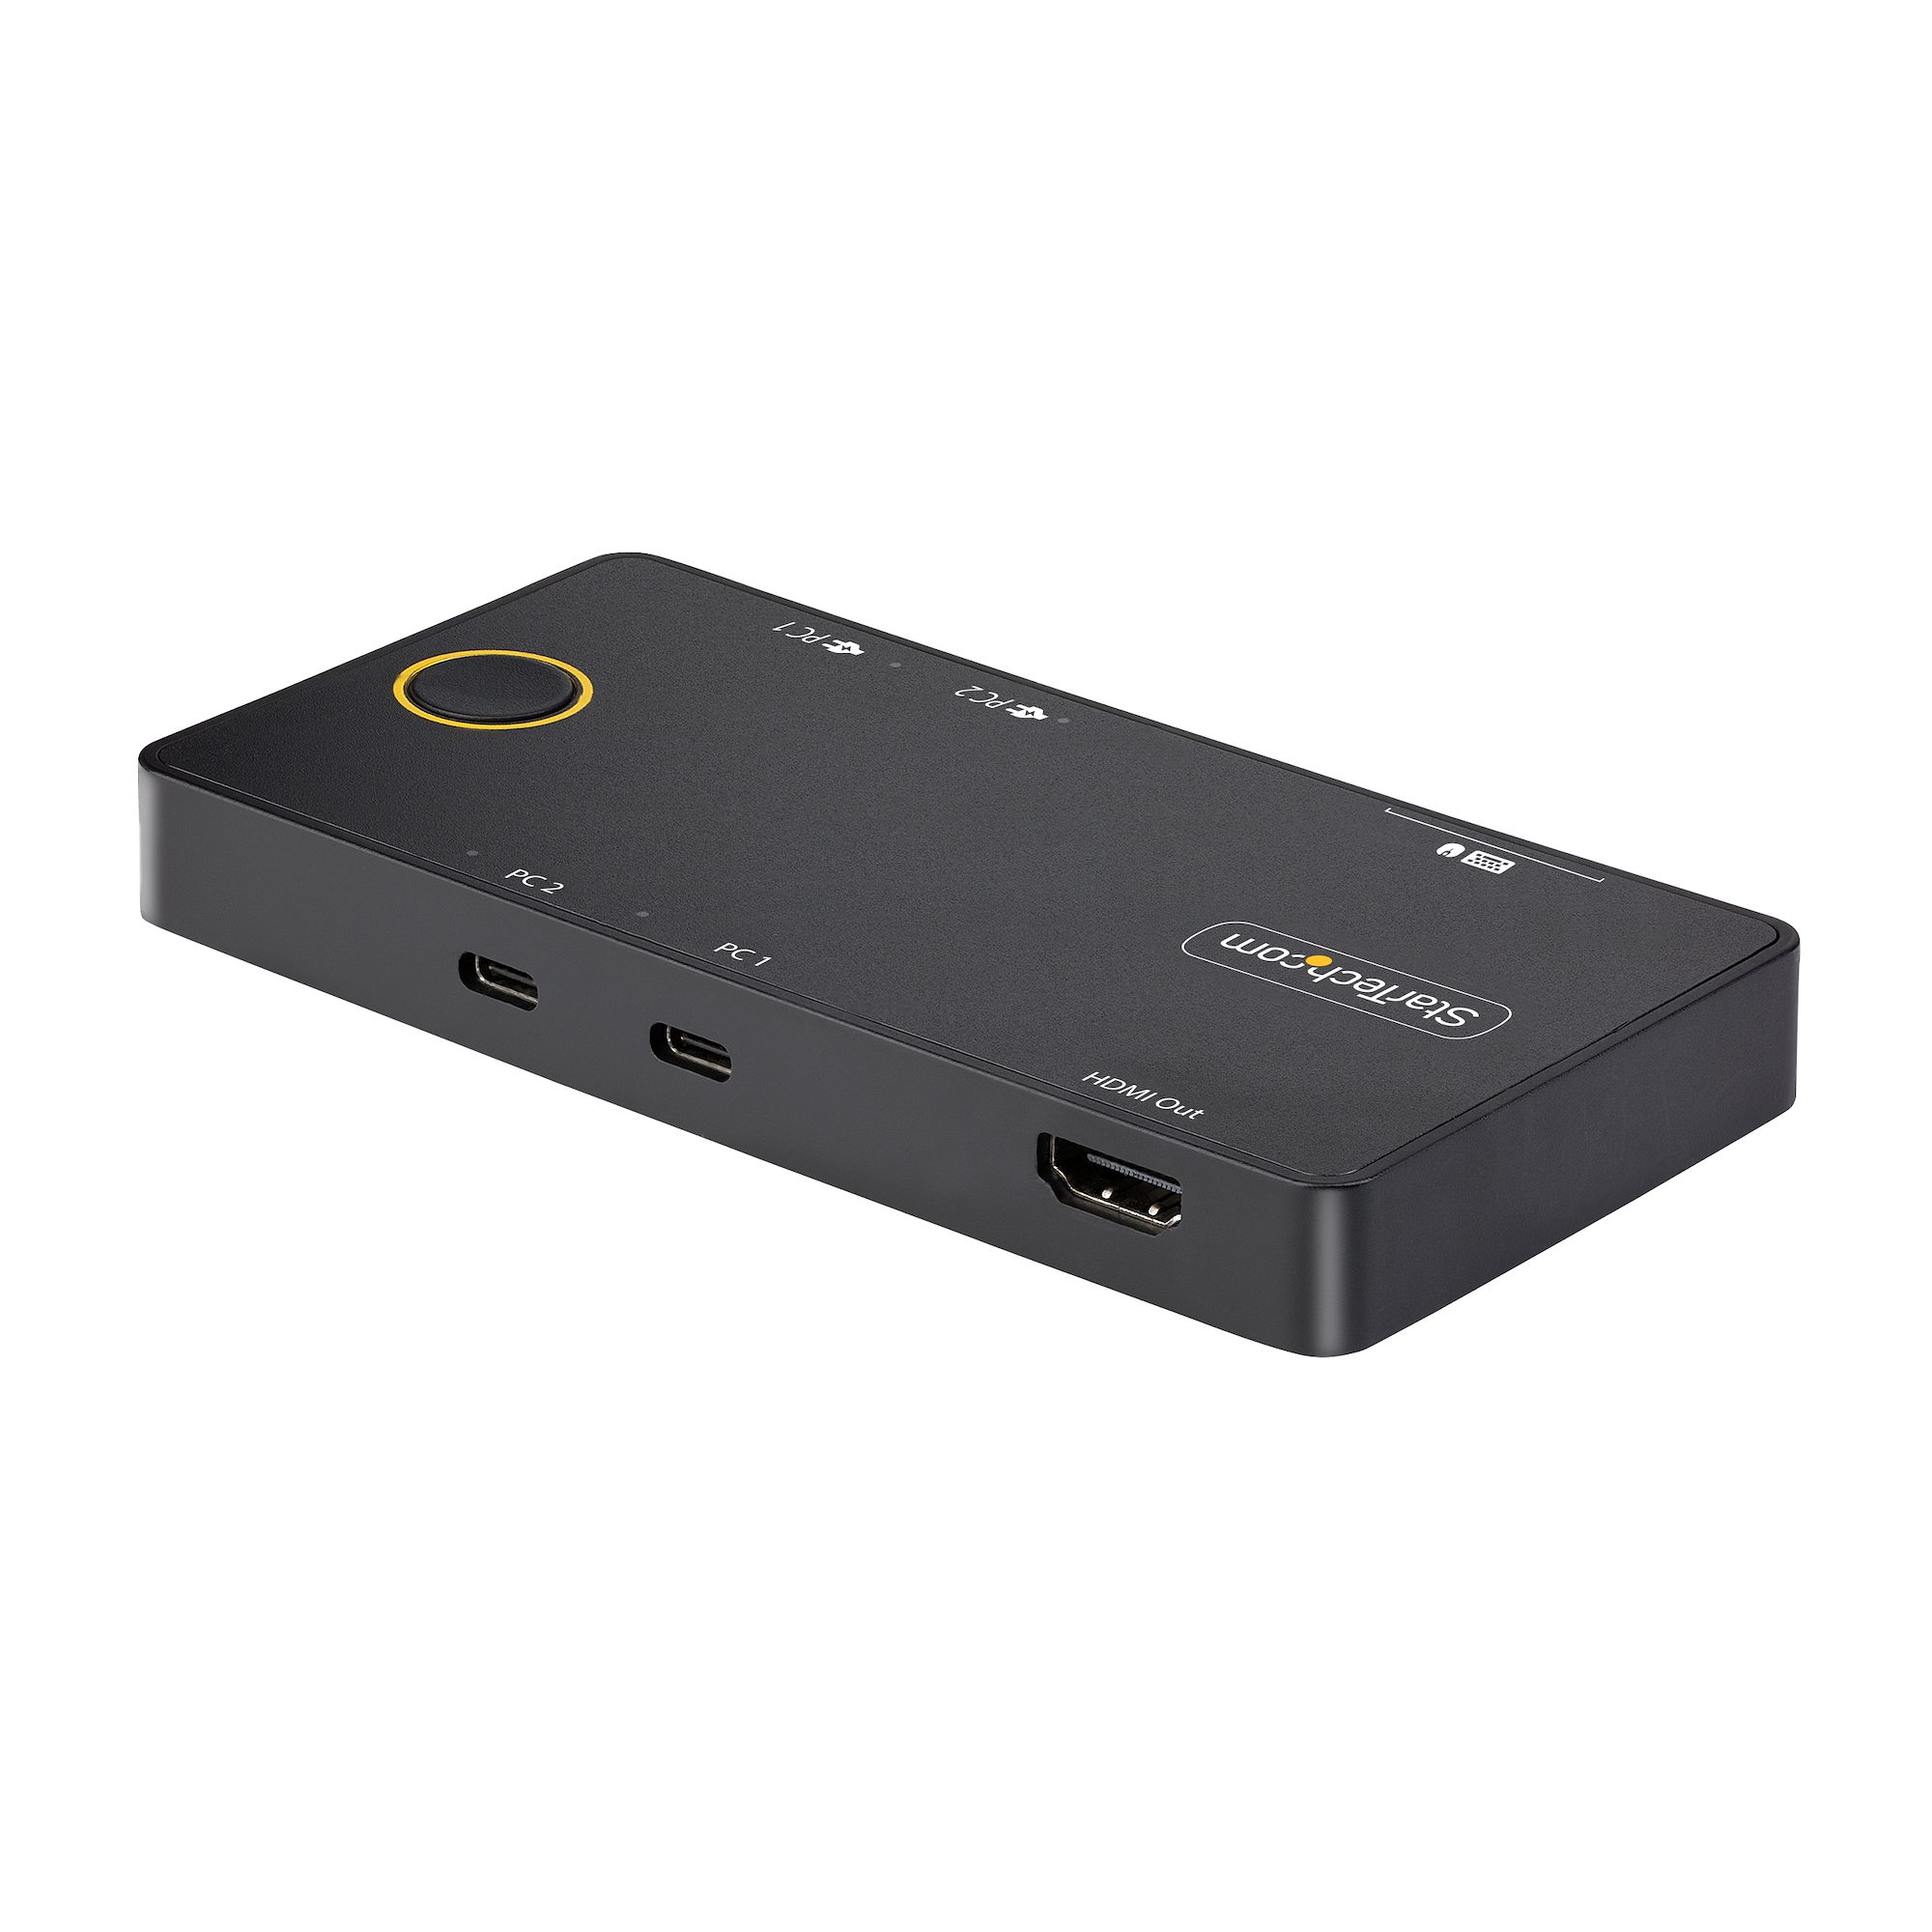 StarTech.com 4-Port 8K HDMI Switch - HDMI 2.1 Switcher 4K 120Hz HDR10+, 8K  60Hz UHD, HDMI Switch 4 In 1 Out - Auto/Manual Source Switching - Power  Adapter and Remote Included 